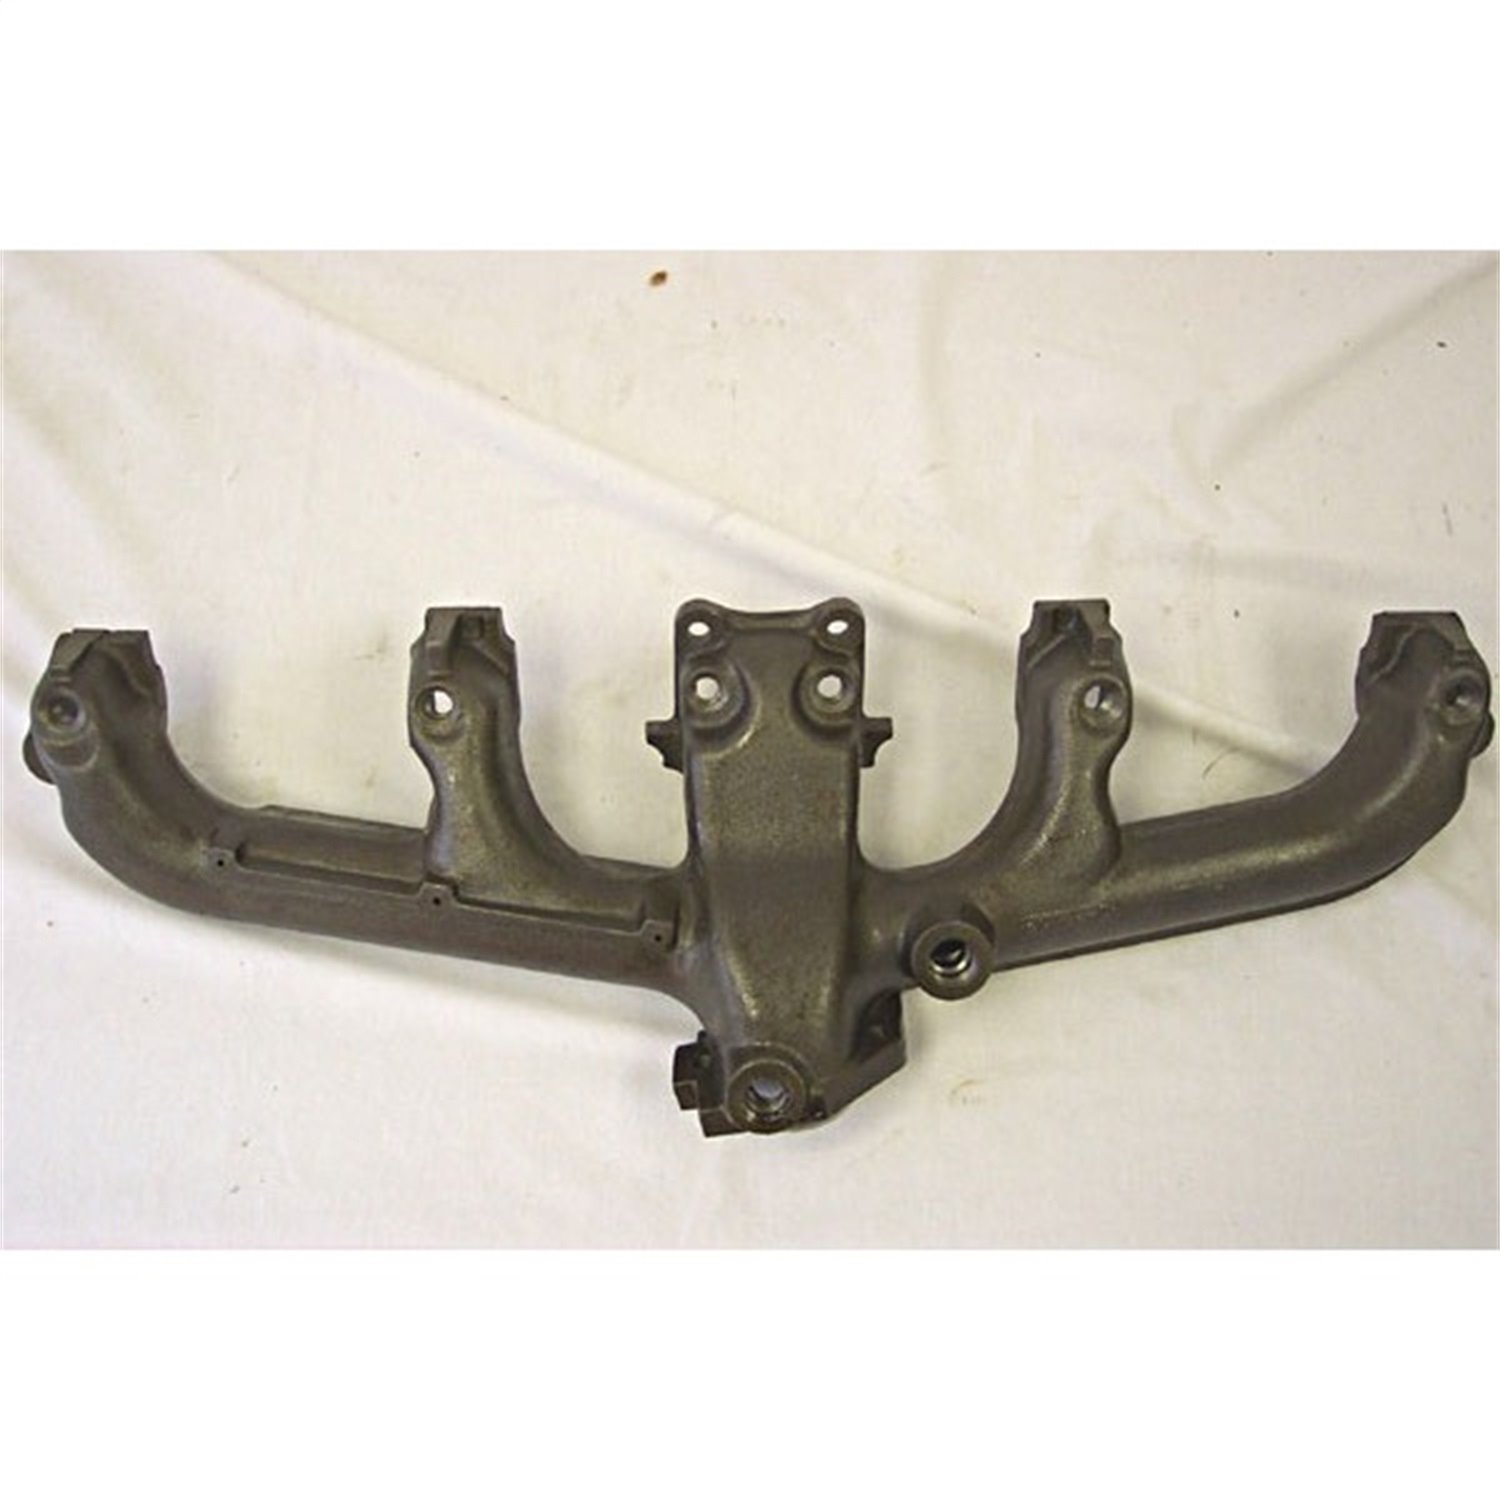 Exhaust Manifold Kit 1981-1991 Jeep CJ and Wrangler By Omix-ADA